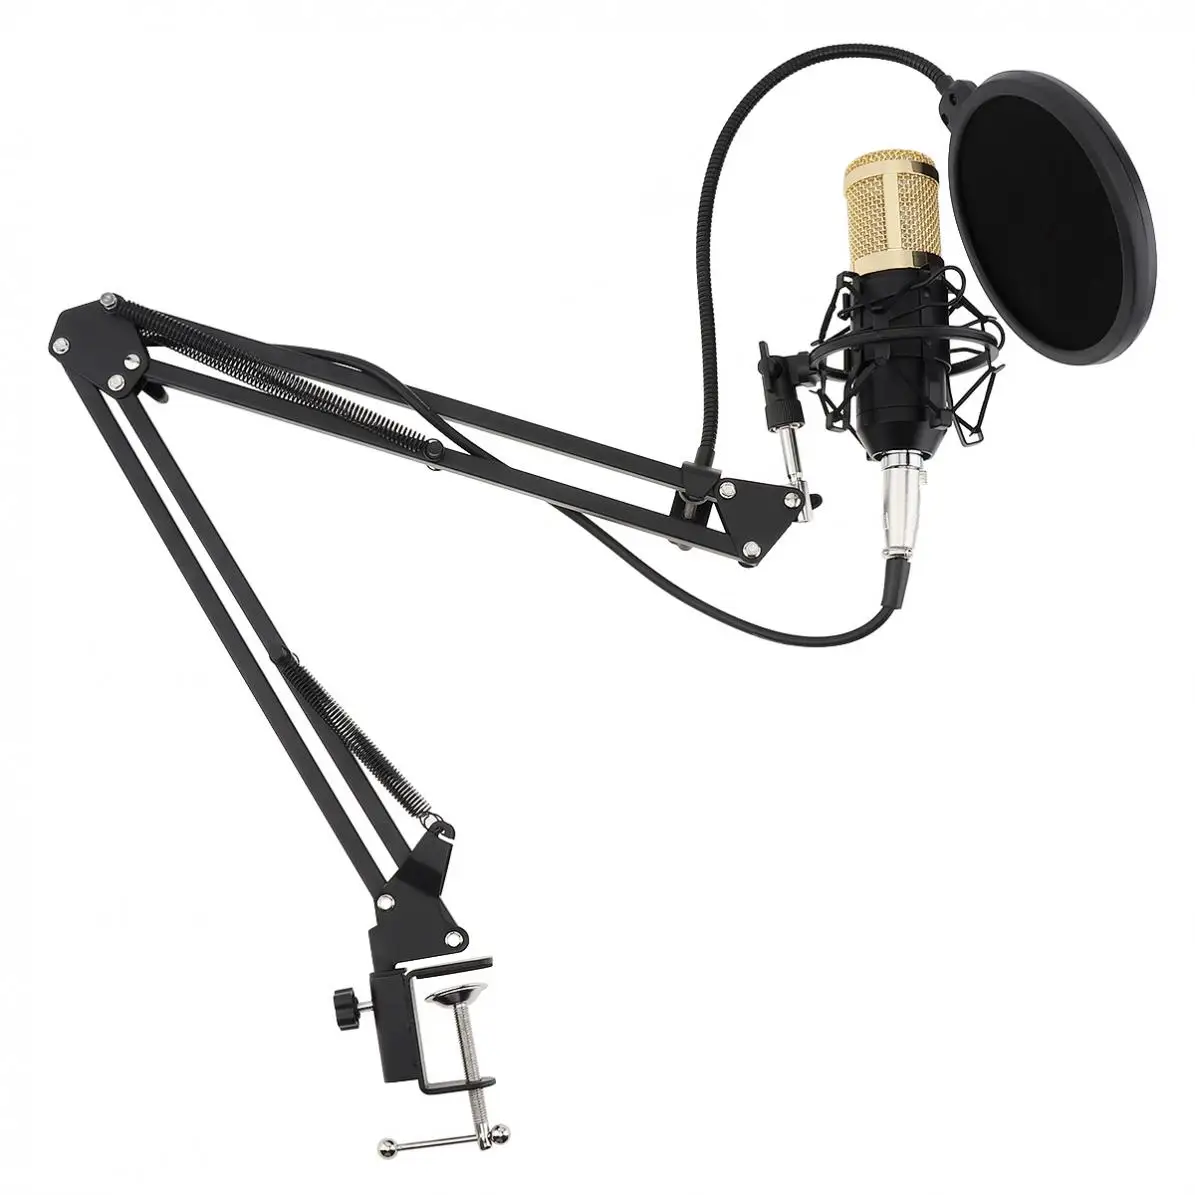 BM-800 Professional Condenser Microphone Live Microphone with Phantom Power Supply Karaoke Condenser Microphone Suit Kits enlarge